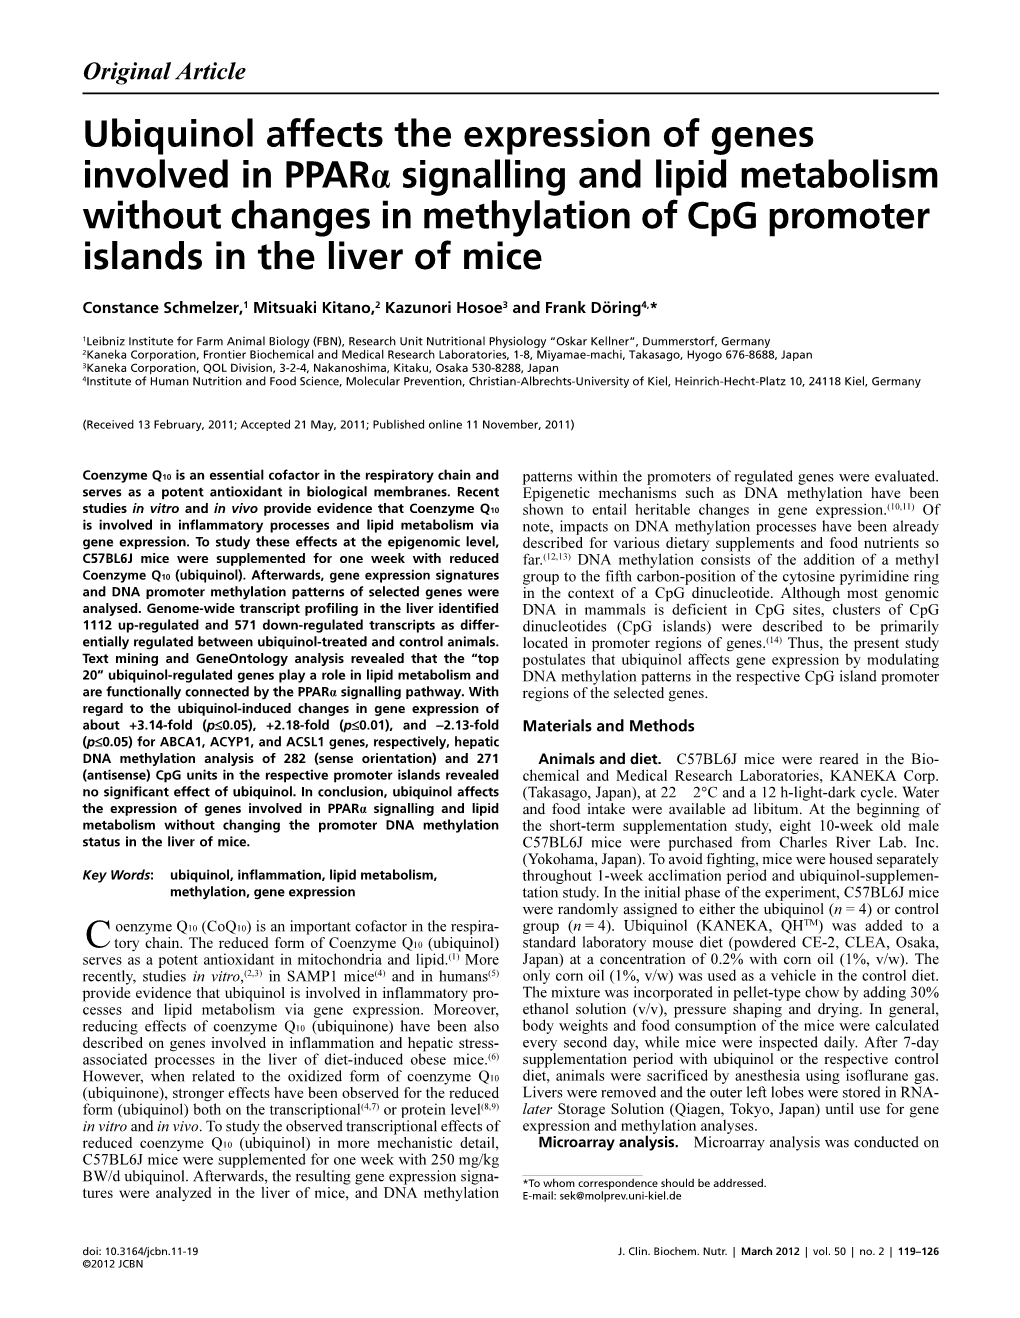 Ubiquinol Affects the Expression of Genes Involved in Pparα Signalling and Lipid Metabolism Without Changes in Methylation of C